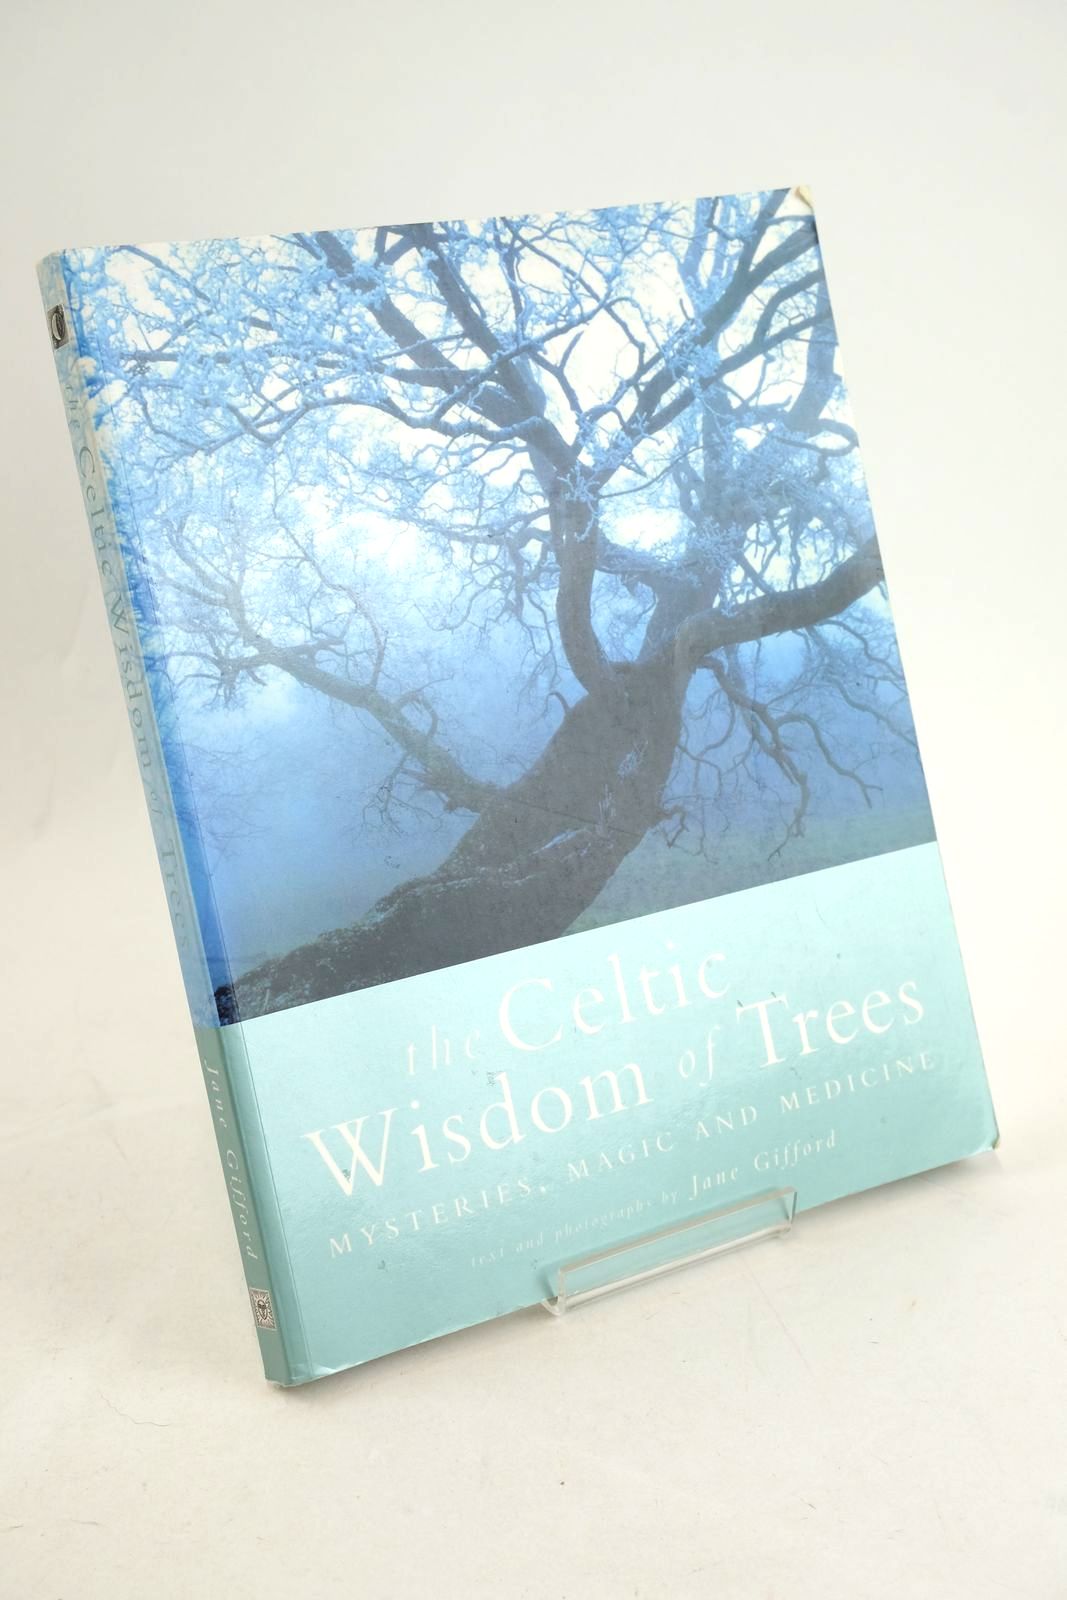 Photo of THE CELTIC WISDOM OF TREES: MYSTERIES, MAGIC, AND MEDICINE- Stock Number: 1327478